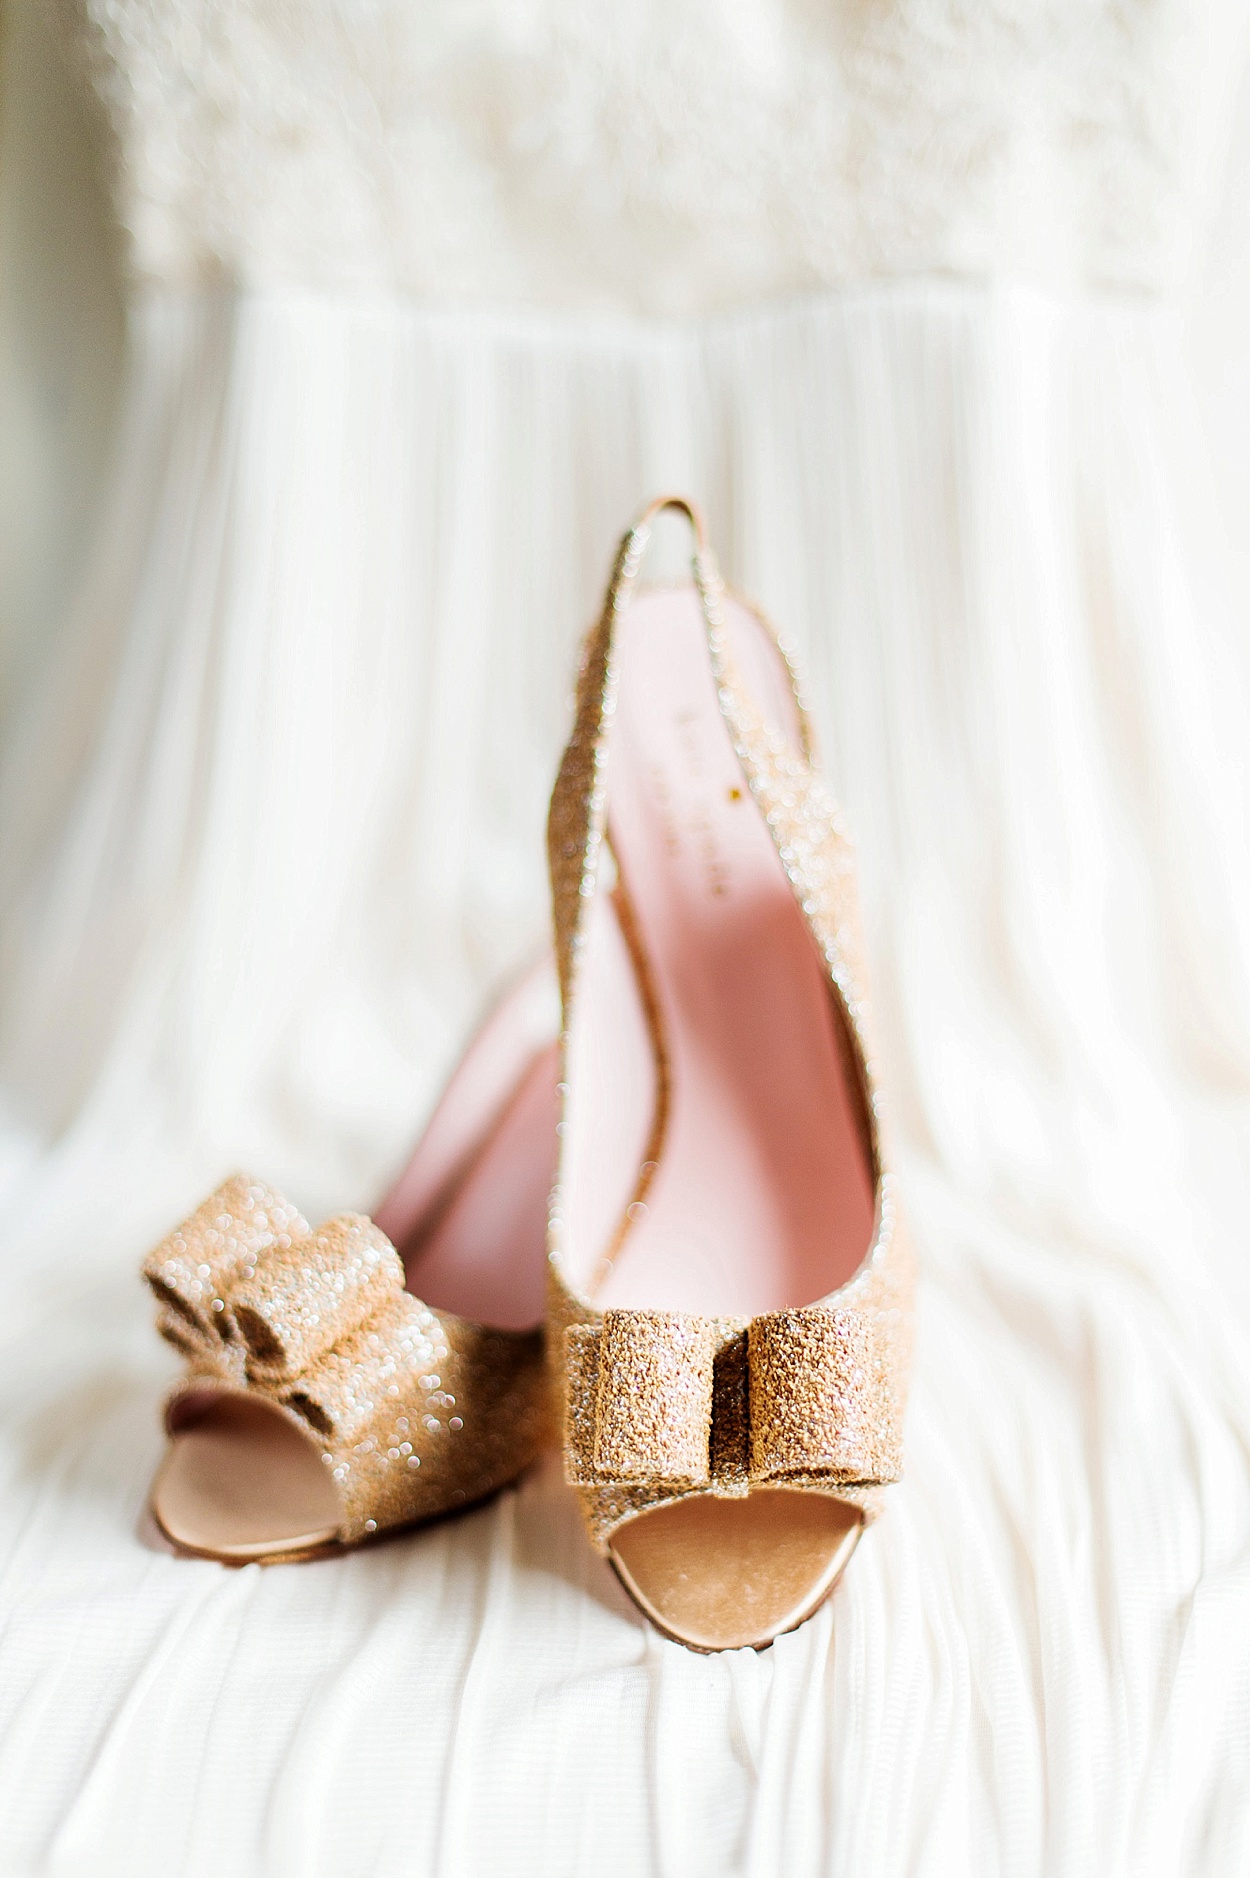 Kate Spade Charm Heels | Washington DC elopement style vow renewal | Justin & Mary